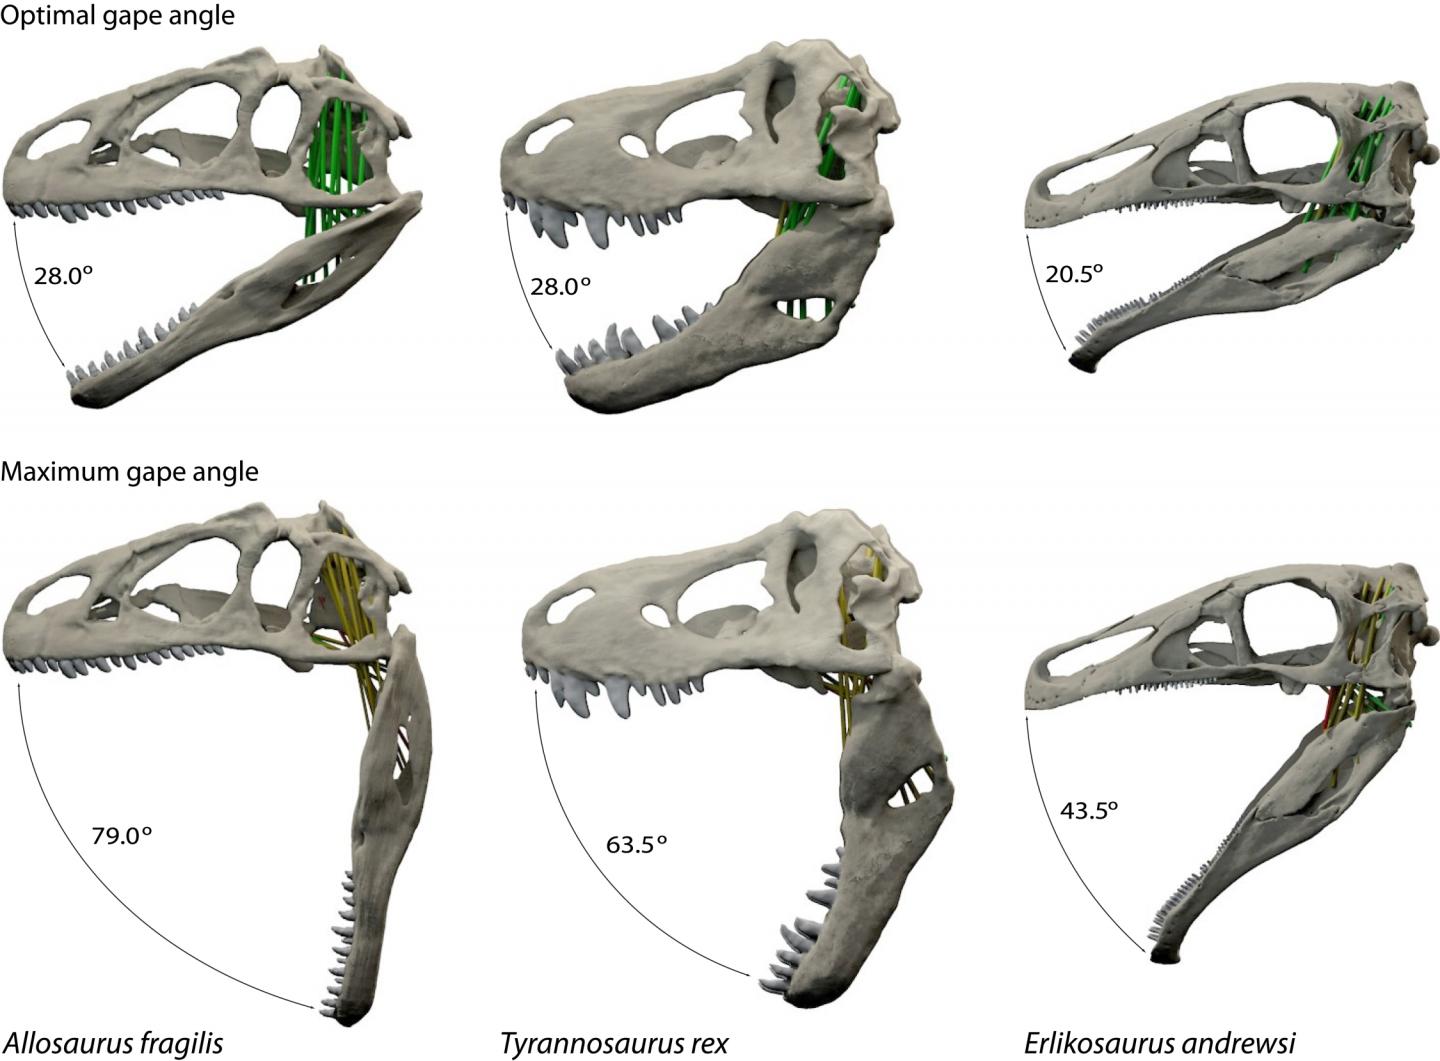 Optimal and Maximal Jaw Gapes for the Three Dinosaurs in the New Study